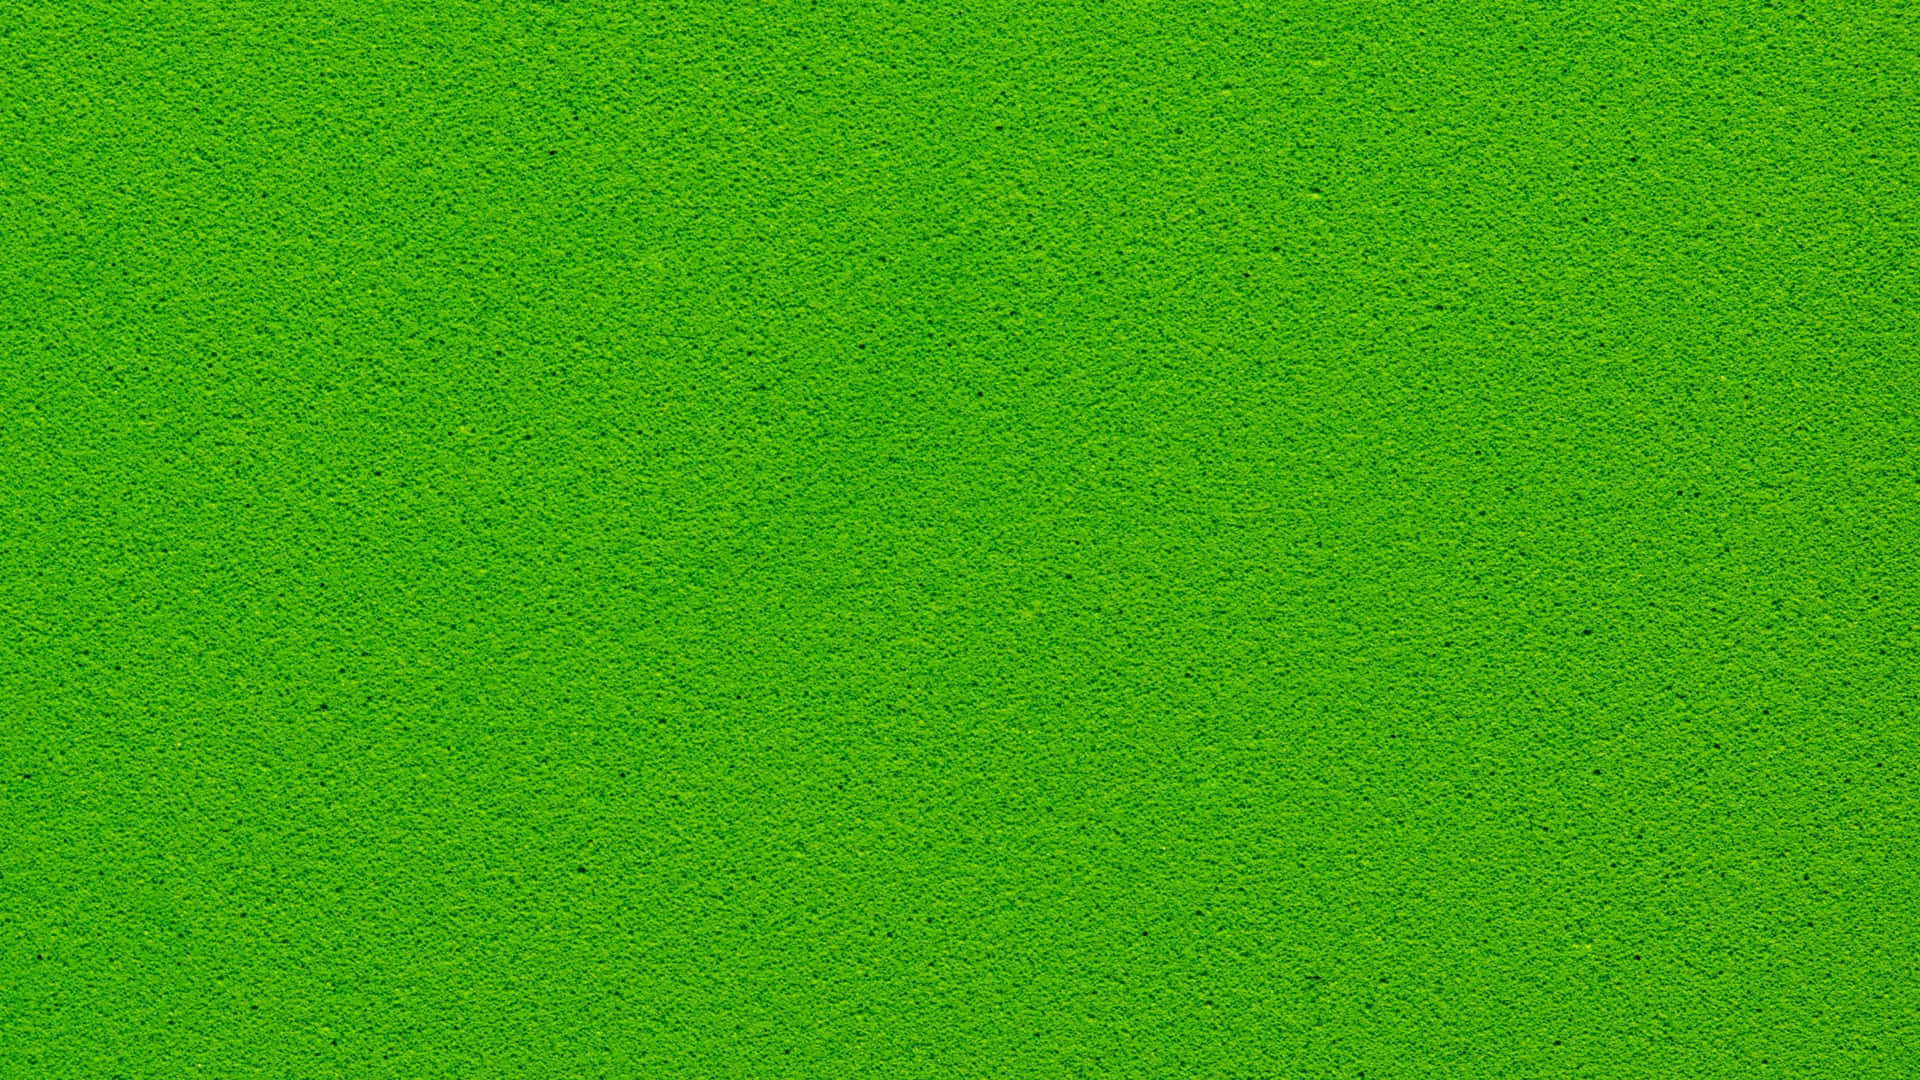 A Green Background With A Small Amount Of Dirt